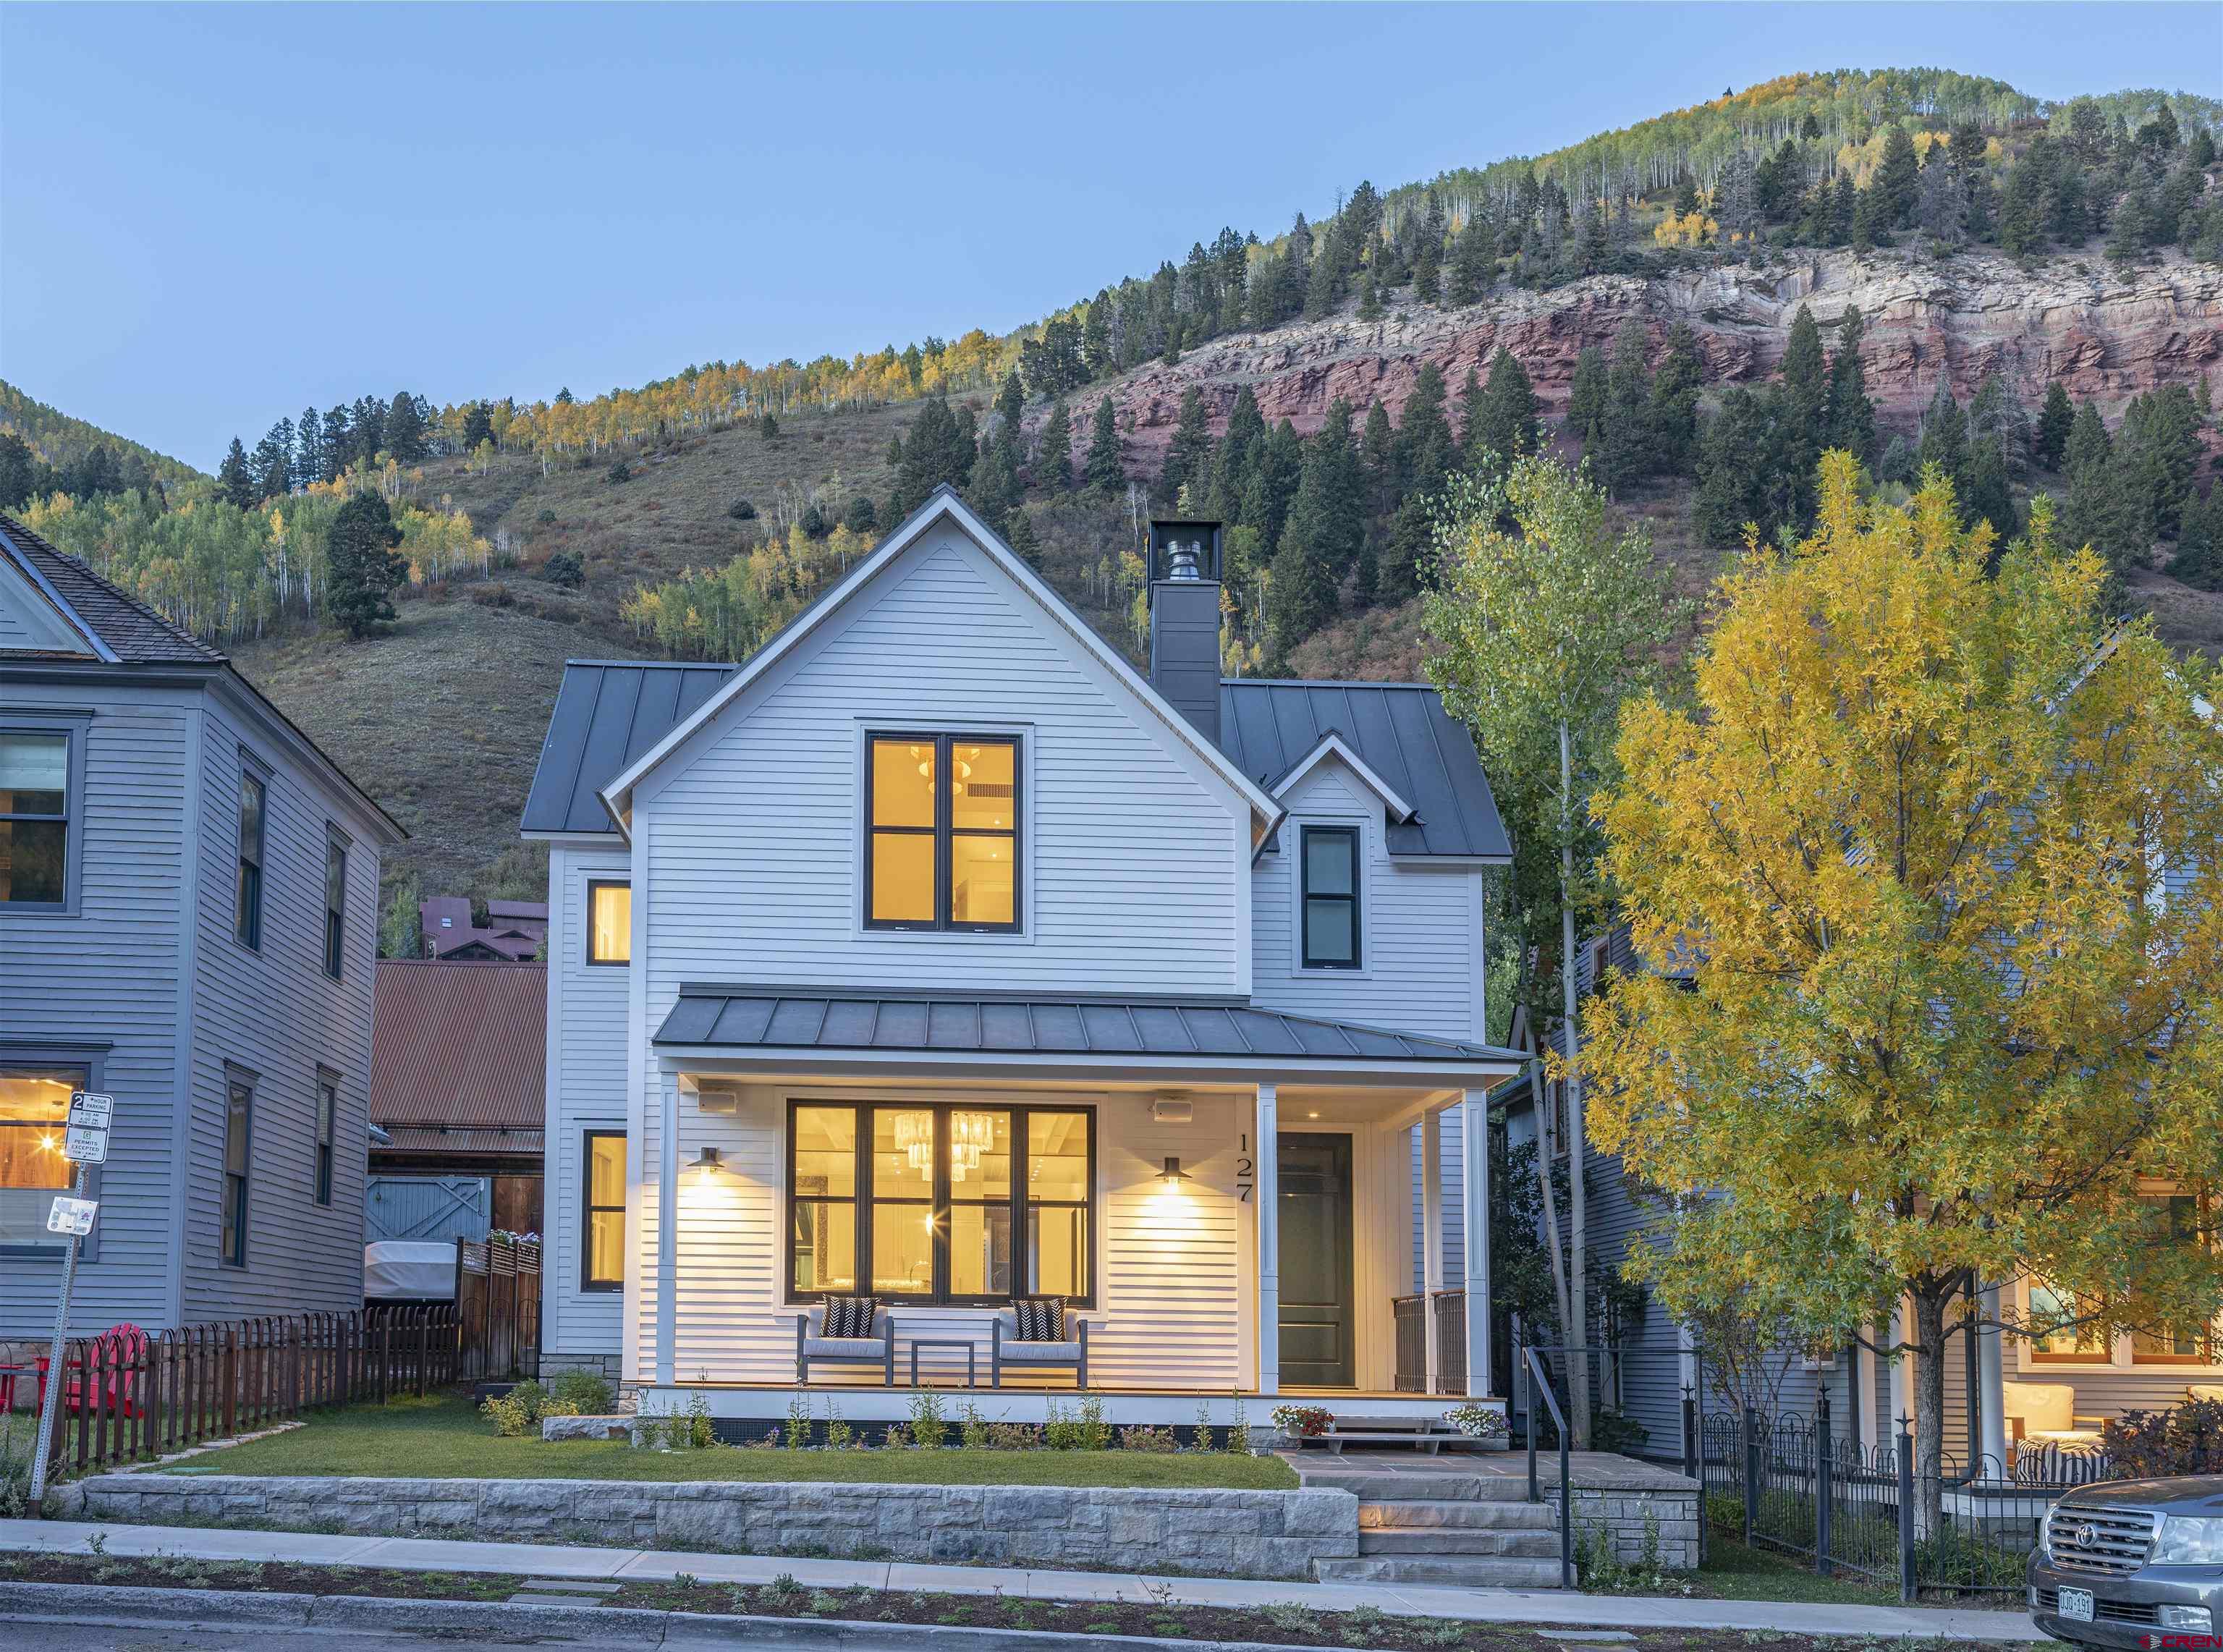 This exquisite high-end home designed by Sante Architects is located in the heart of the Town of Telluride, just one block from Main Street. This stunning property boasts 7 luxurious bedrooms and 7 beautifully appointed baths, providing ample space for family and guests.  The home features an open living and kitchen area, perfect for entertaining, with top-of-the-line finishes and furnishings that create an inviting and elegant atmosphere. The large yard offers plenty of space for outdoor activities and relaxation, while the garage and additional parking space provides convenience and security for your vehicles.  A unique highlight of this property is the remodeled 1915 guest house, seamlessly blending historical charm with modern amenities. Enjoy breathtaking views from various vantage points throughout the home, making every moment spent here truly special.  Offered fully furnished, this home is ready for you to move in and start enjoying Telluride in style immediately. Don’t miss the opportunity to own this exceptional property in one of the most sought-after locations in town.